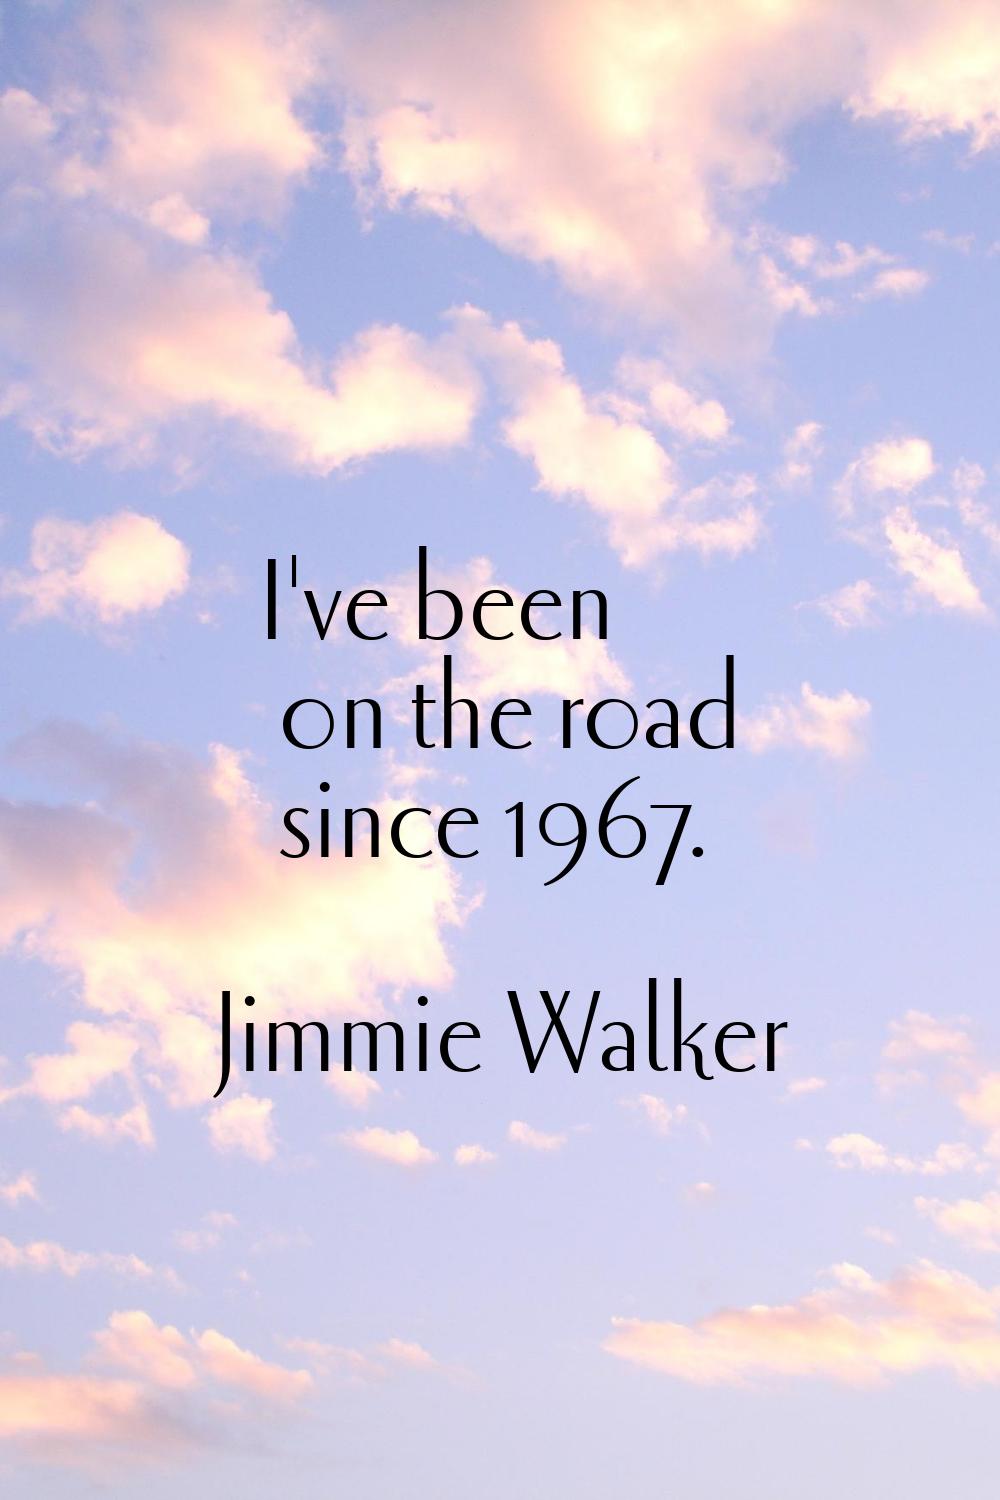 I've been on the road since 1967.